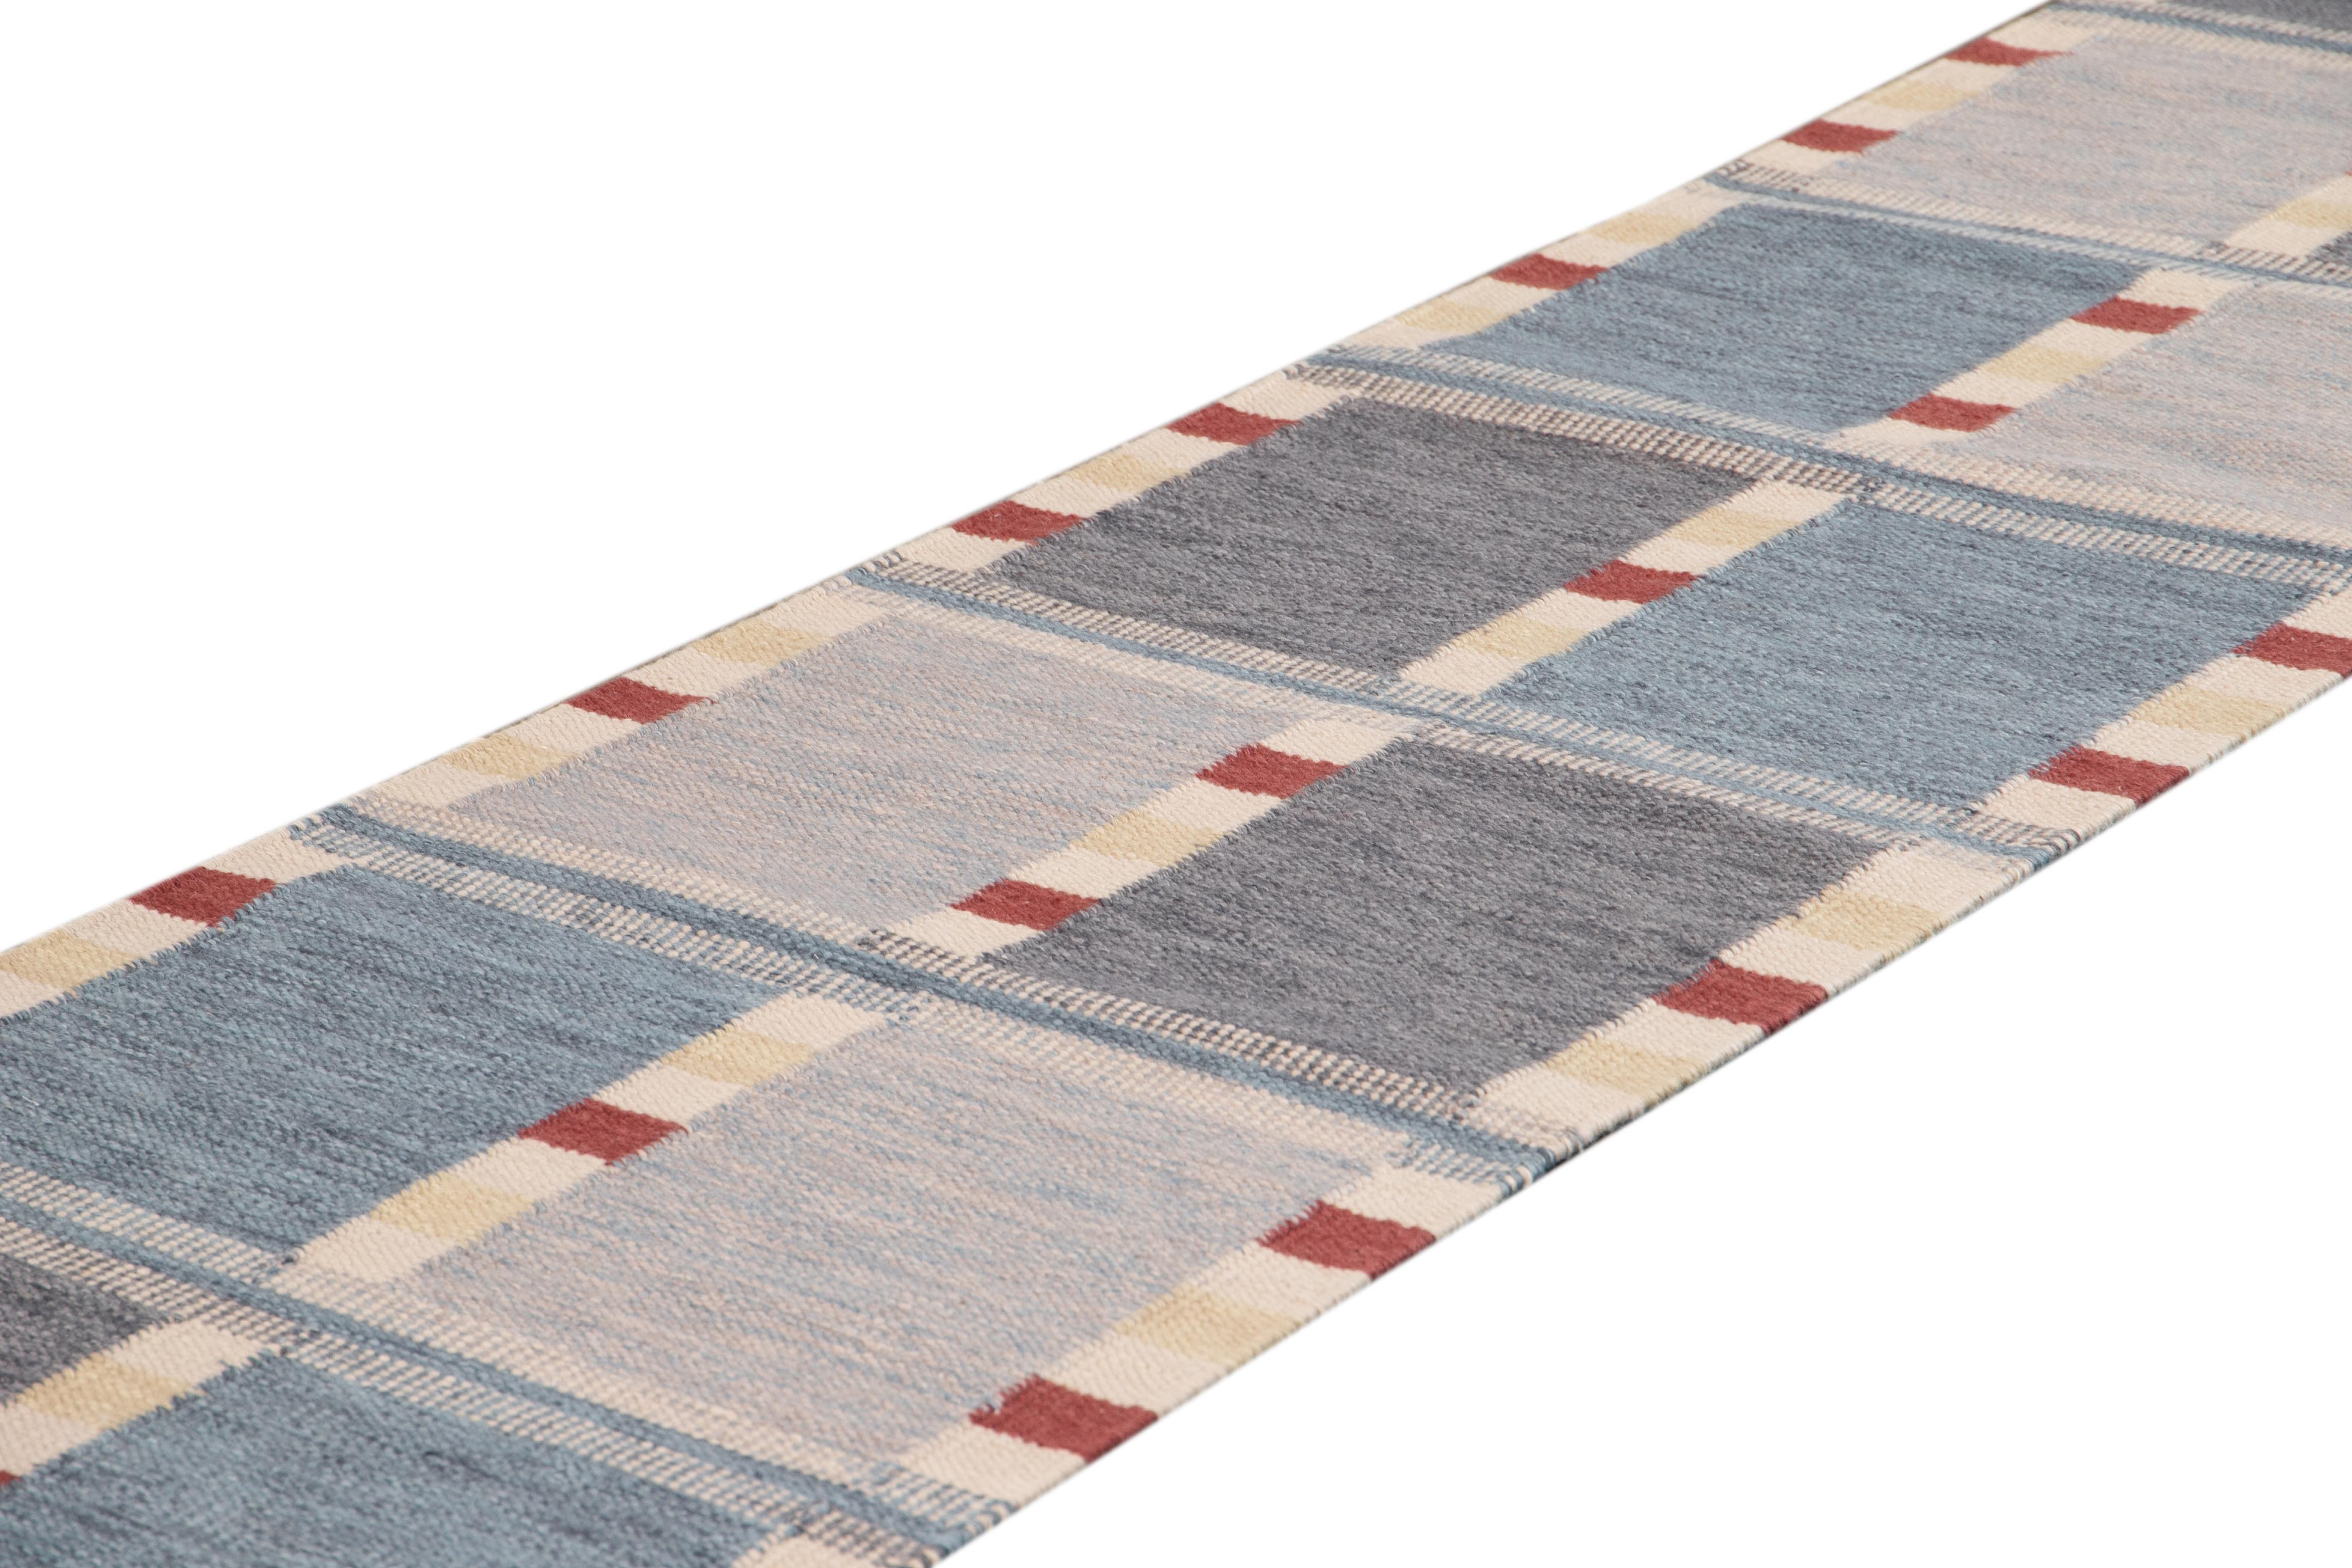 Beautiful contemporary Swedish style runner rug, hand knotted wool with a blue field, ivory and red accents in an all-over Classic Scandinavian geometric design.
This rug measures 3' 4